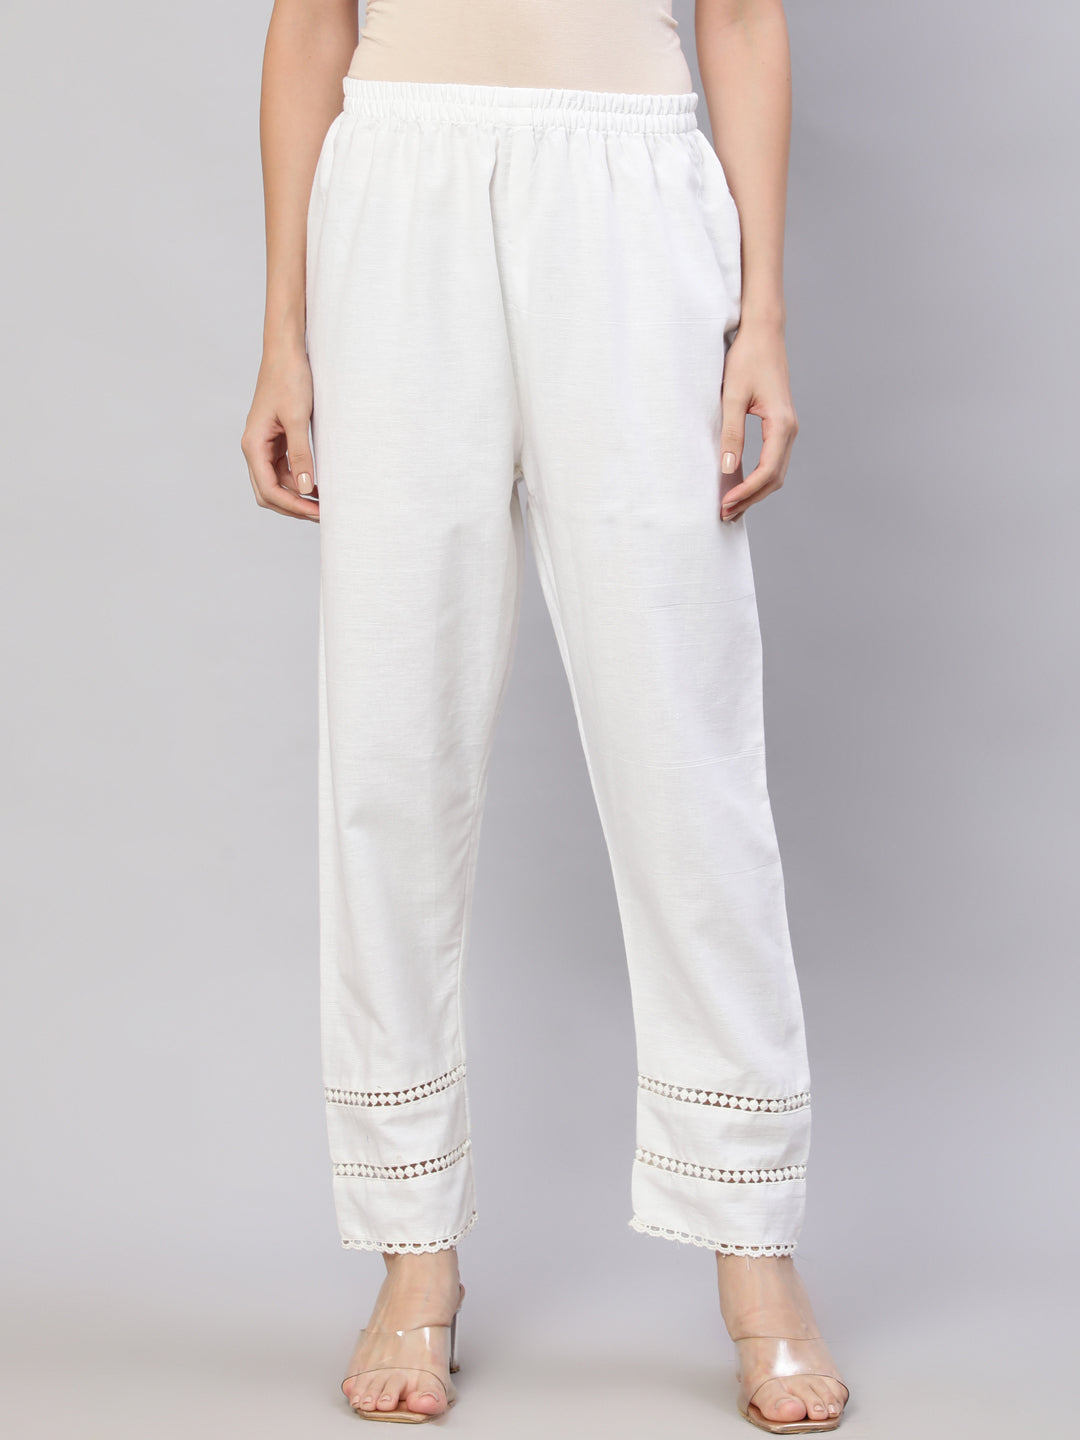 Women's White Solid Pant With Lace Details - Nayo Clothing